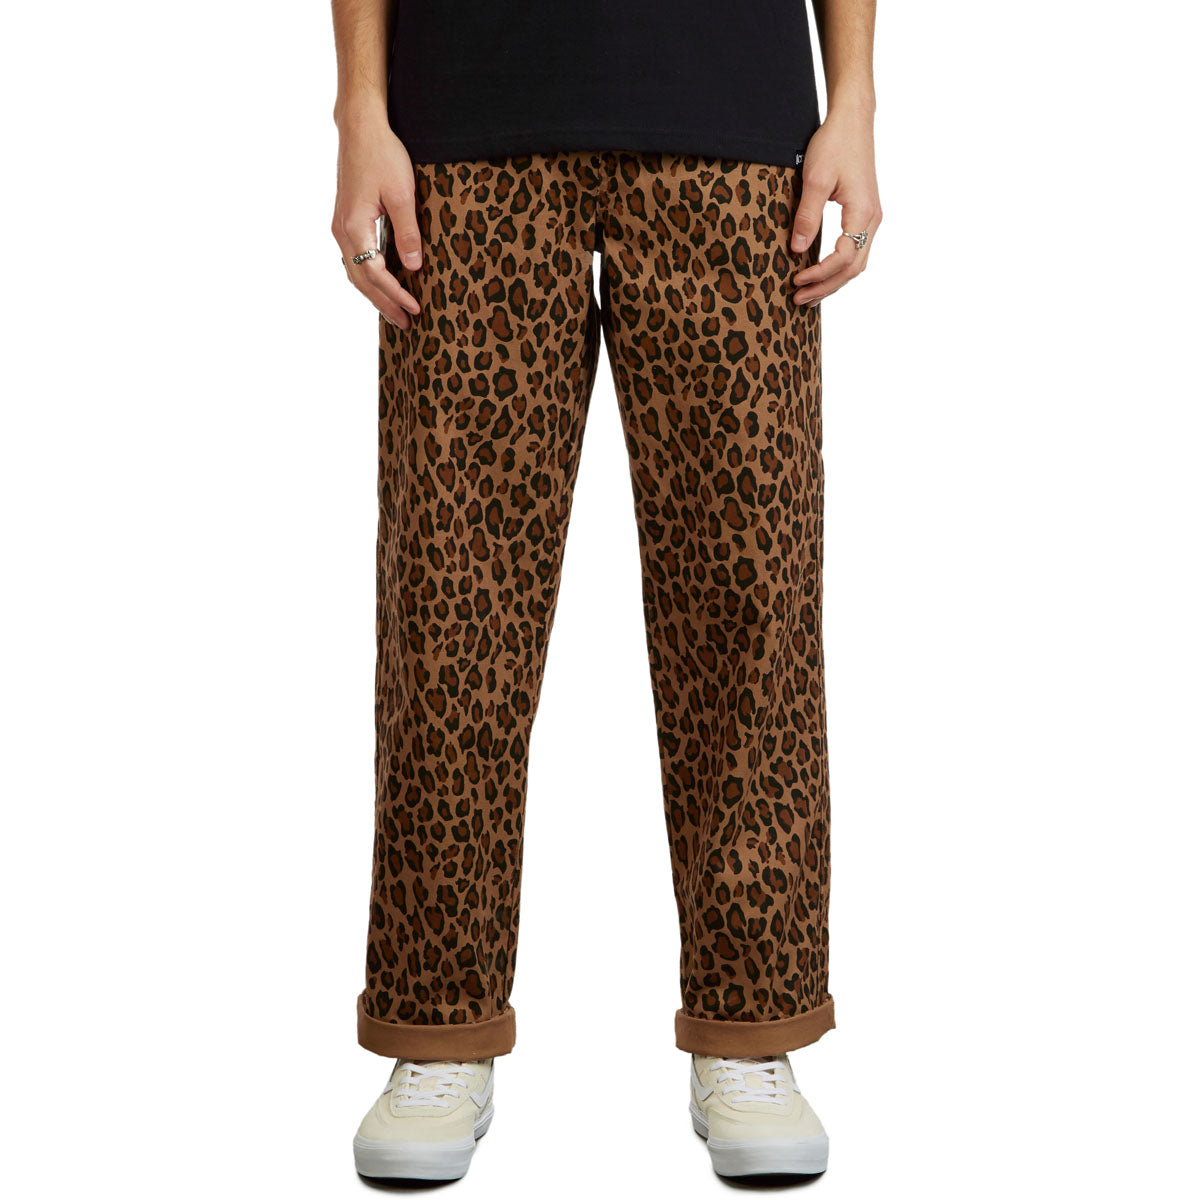 CCS Original Relaxed Chino Pants - Leopard image 4